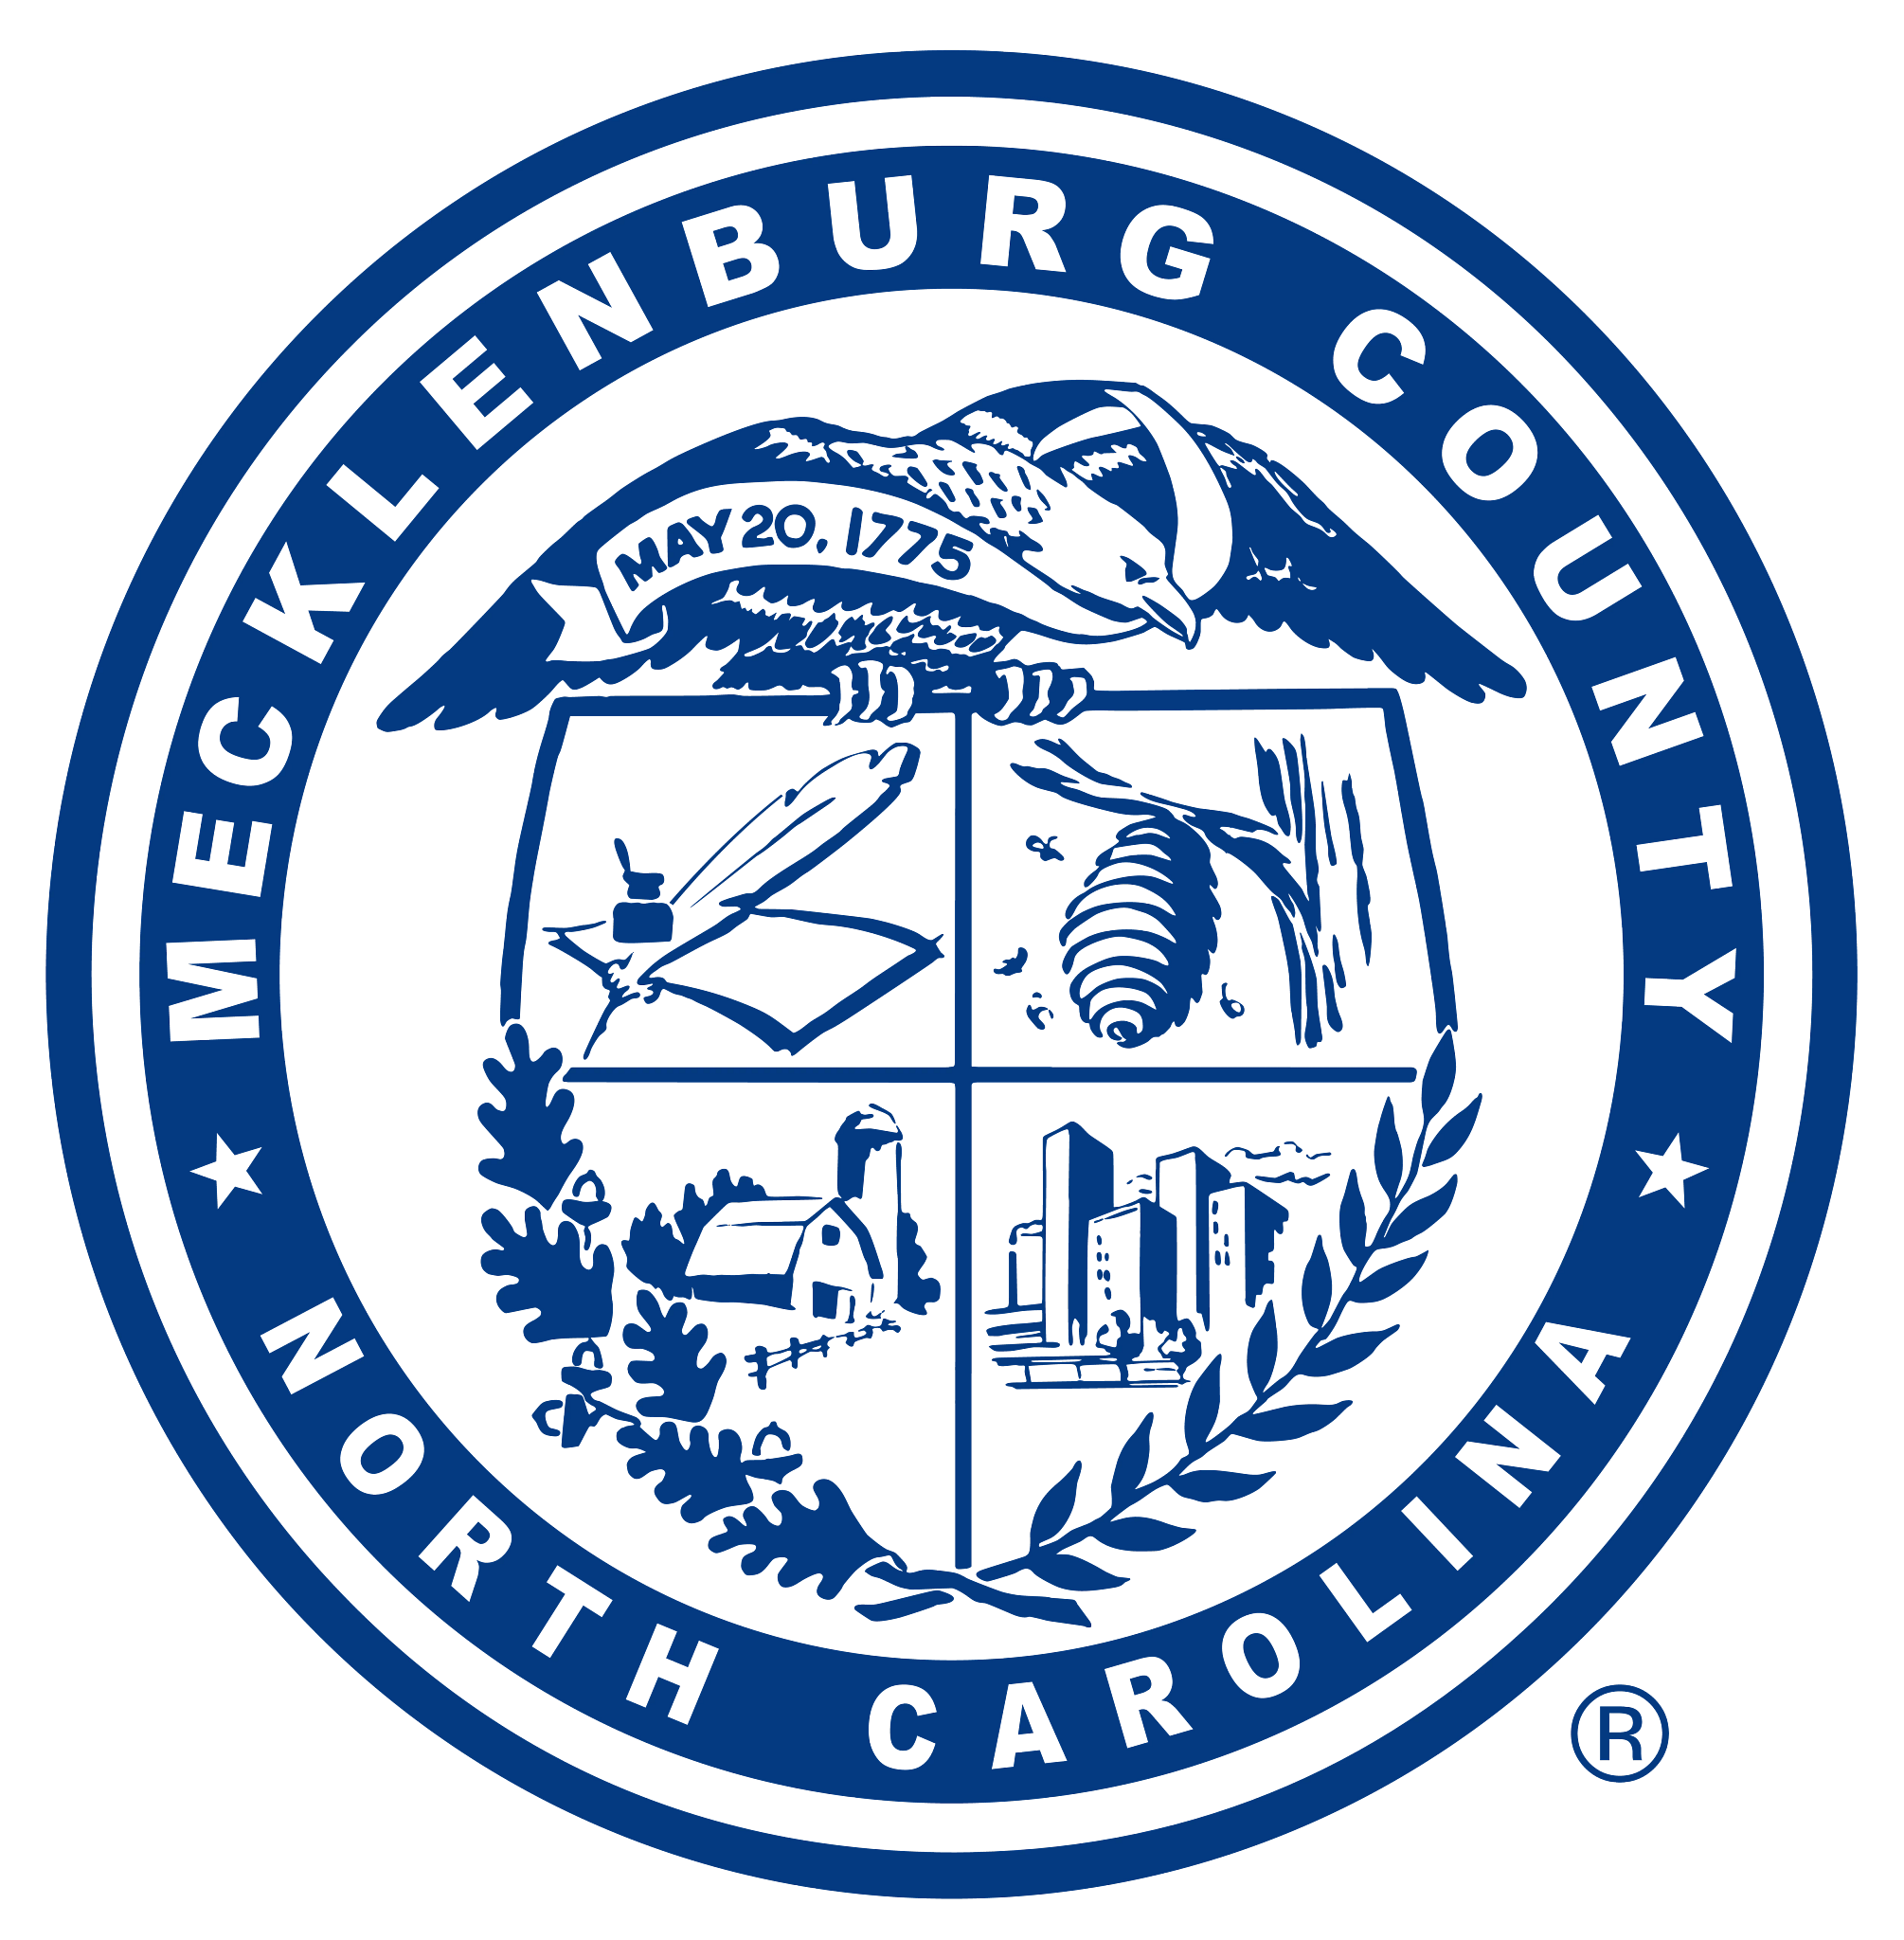 Official Mecklenburg County Seal to be used as a logo to represent the County in visual and marketing communications.